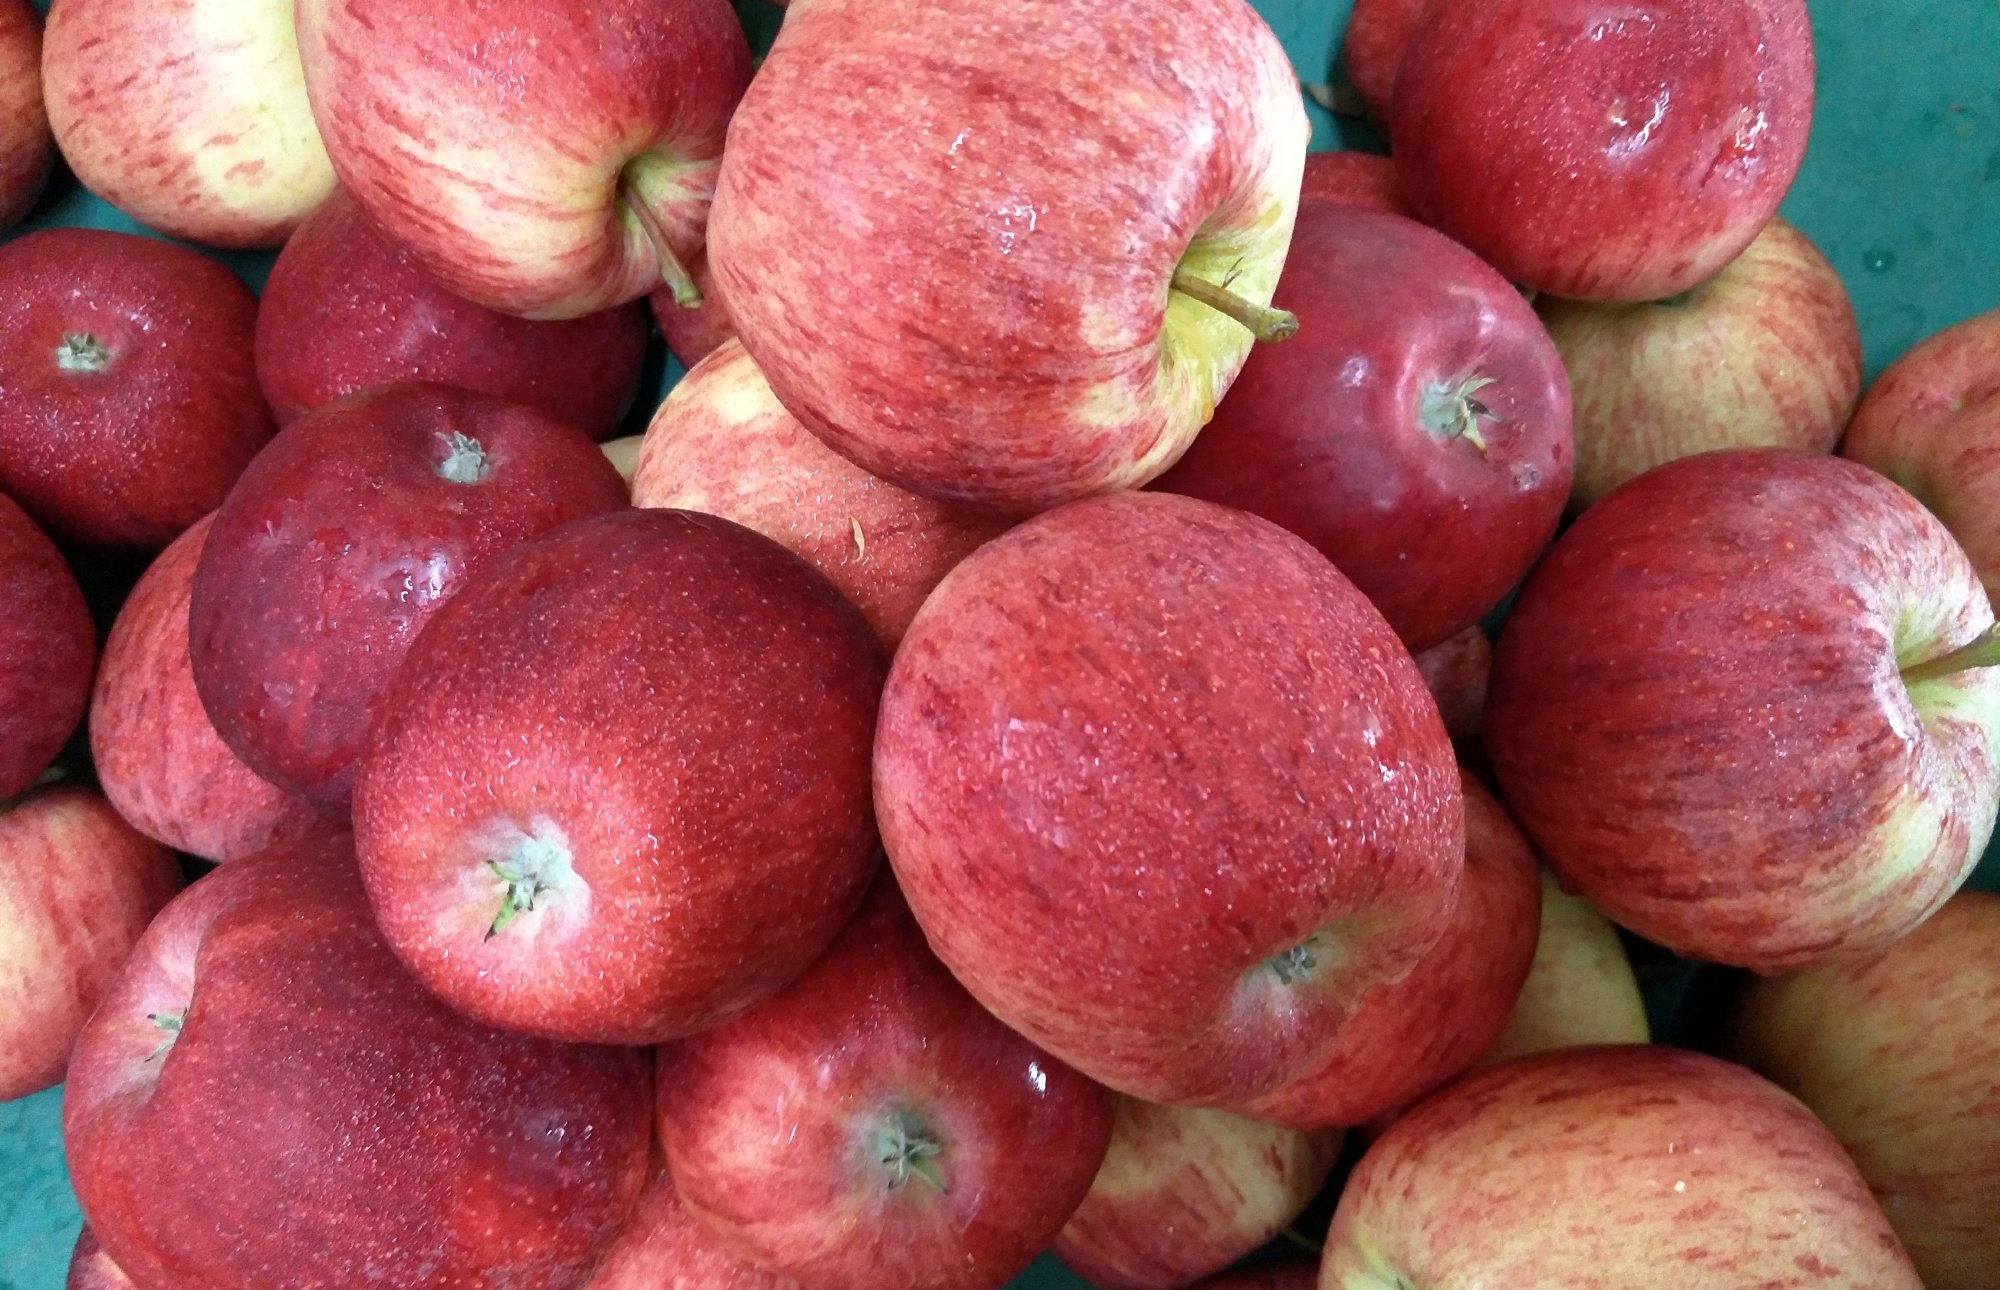 Gorgeous red Gala apples fresh from the orchard of Beltana Grange, Pialligo